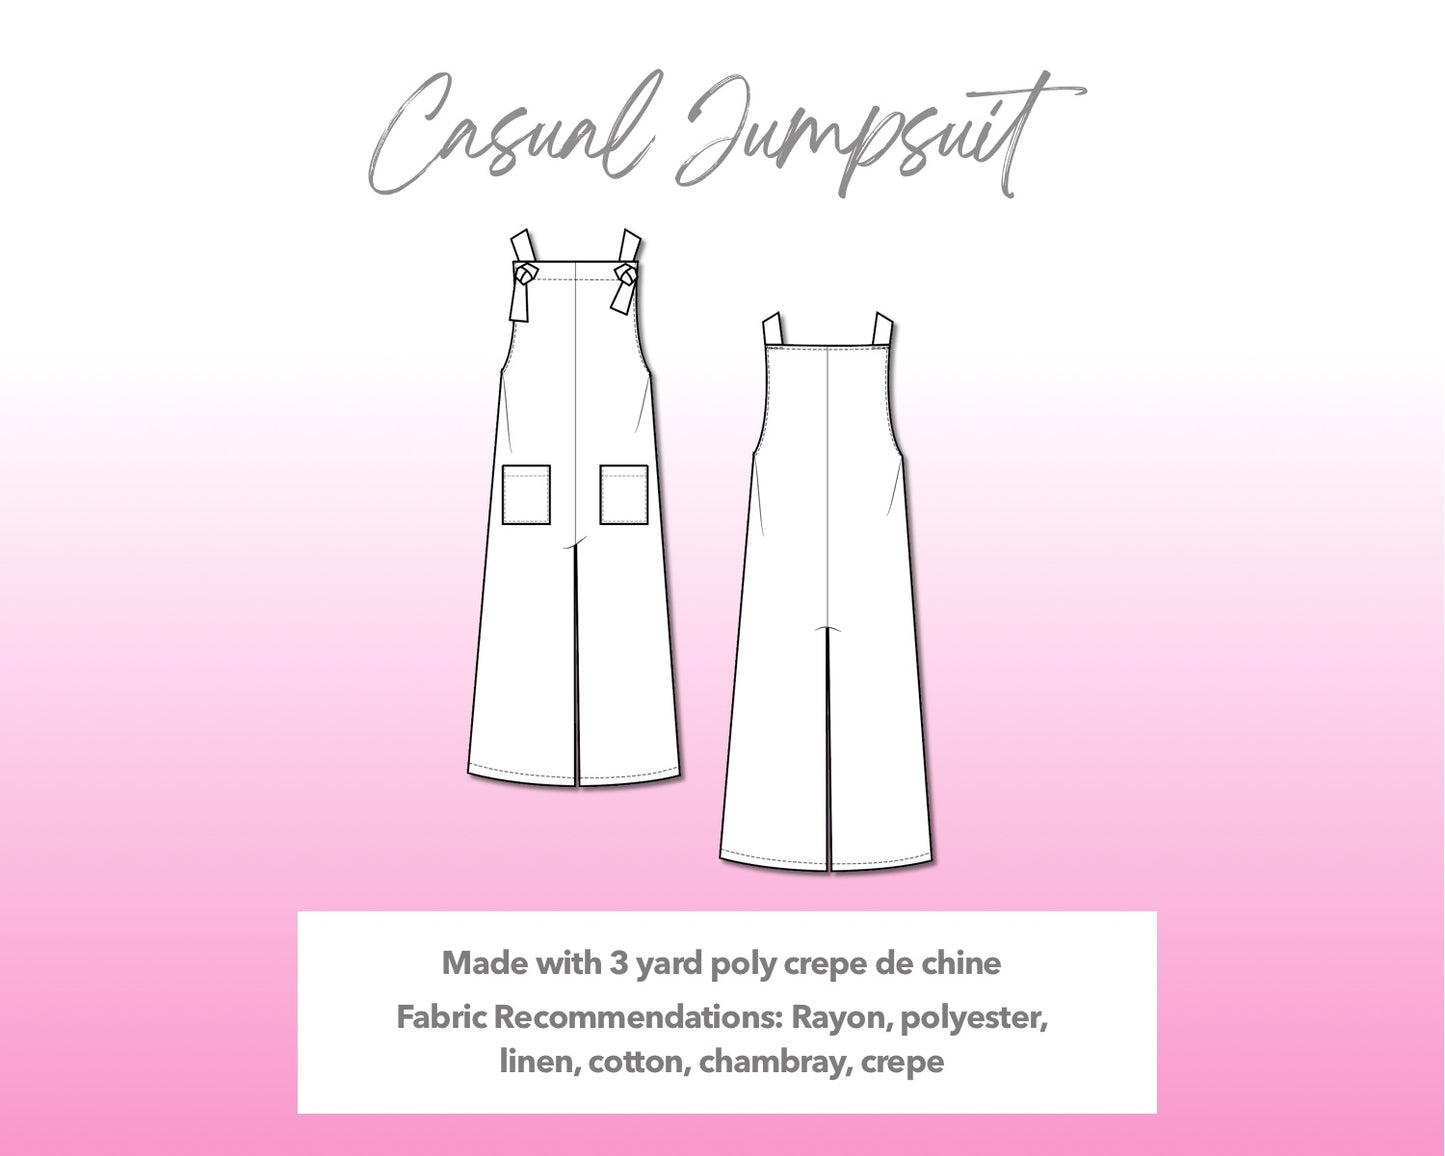 Illustration and detailed description for Casual Jumpsuit sewing pattern.